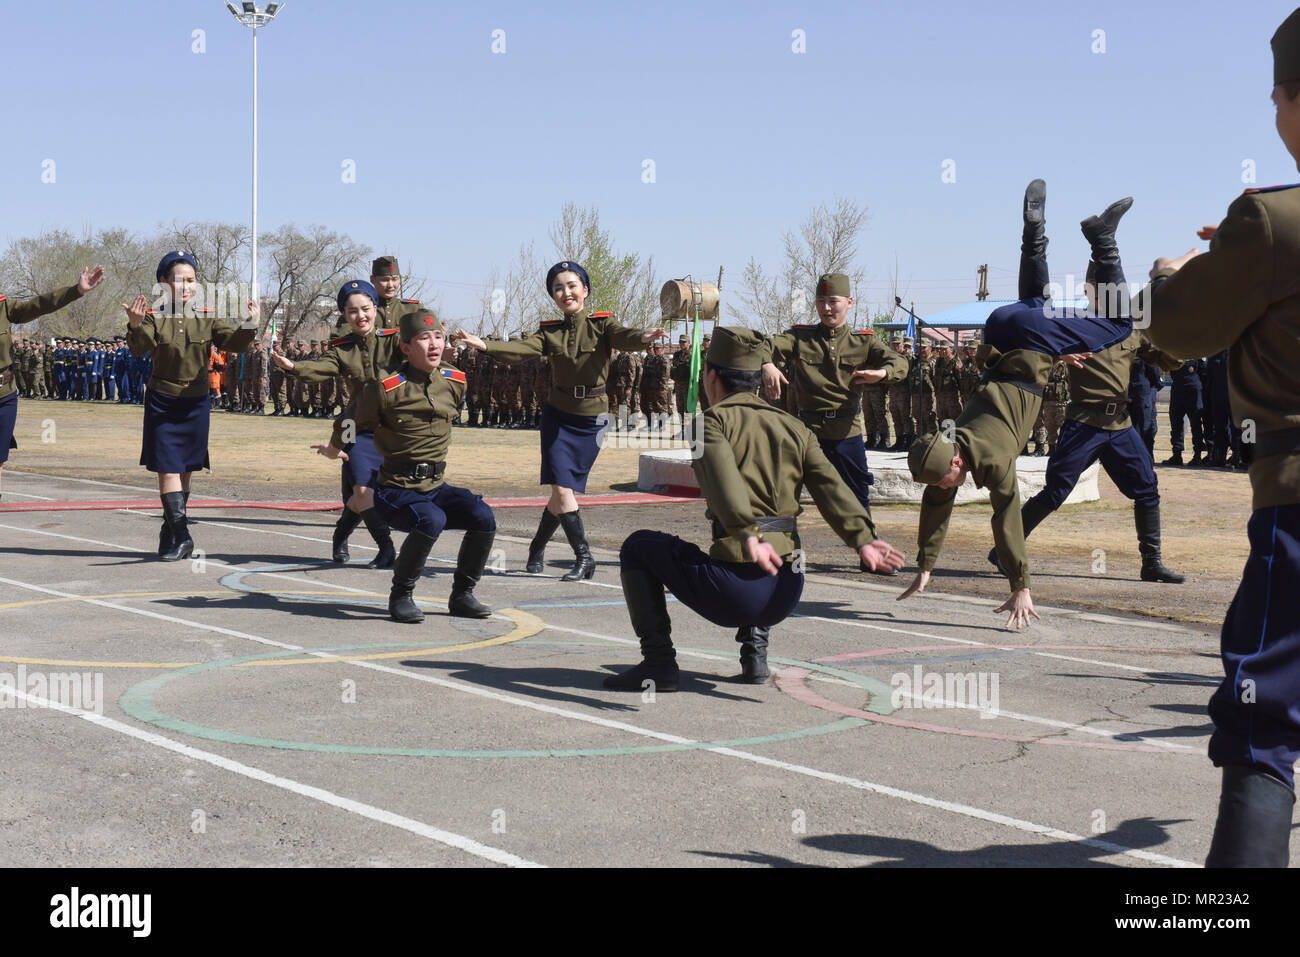 Members of the Mongolian Military Dance and Song Ensemble perform during the opening ceremony for exercise Gobi Wolf 2017 held in Dalanzadgad, Mongolia, May 1, 2017. GW 17 is hosted by the Mongolia National Emergency Management Agency and Mongolian Armed Forces as part of the United States Army Pacific’s humanitarian assistance and disaster relief “Pacific Resilience” series. (U.S. Air Force photo by Maj. John Romspert) Stock Photo